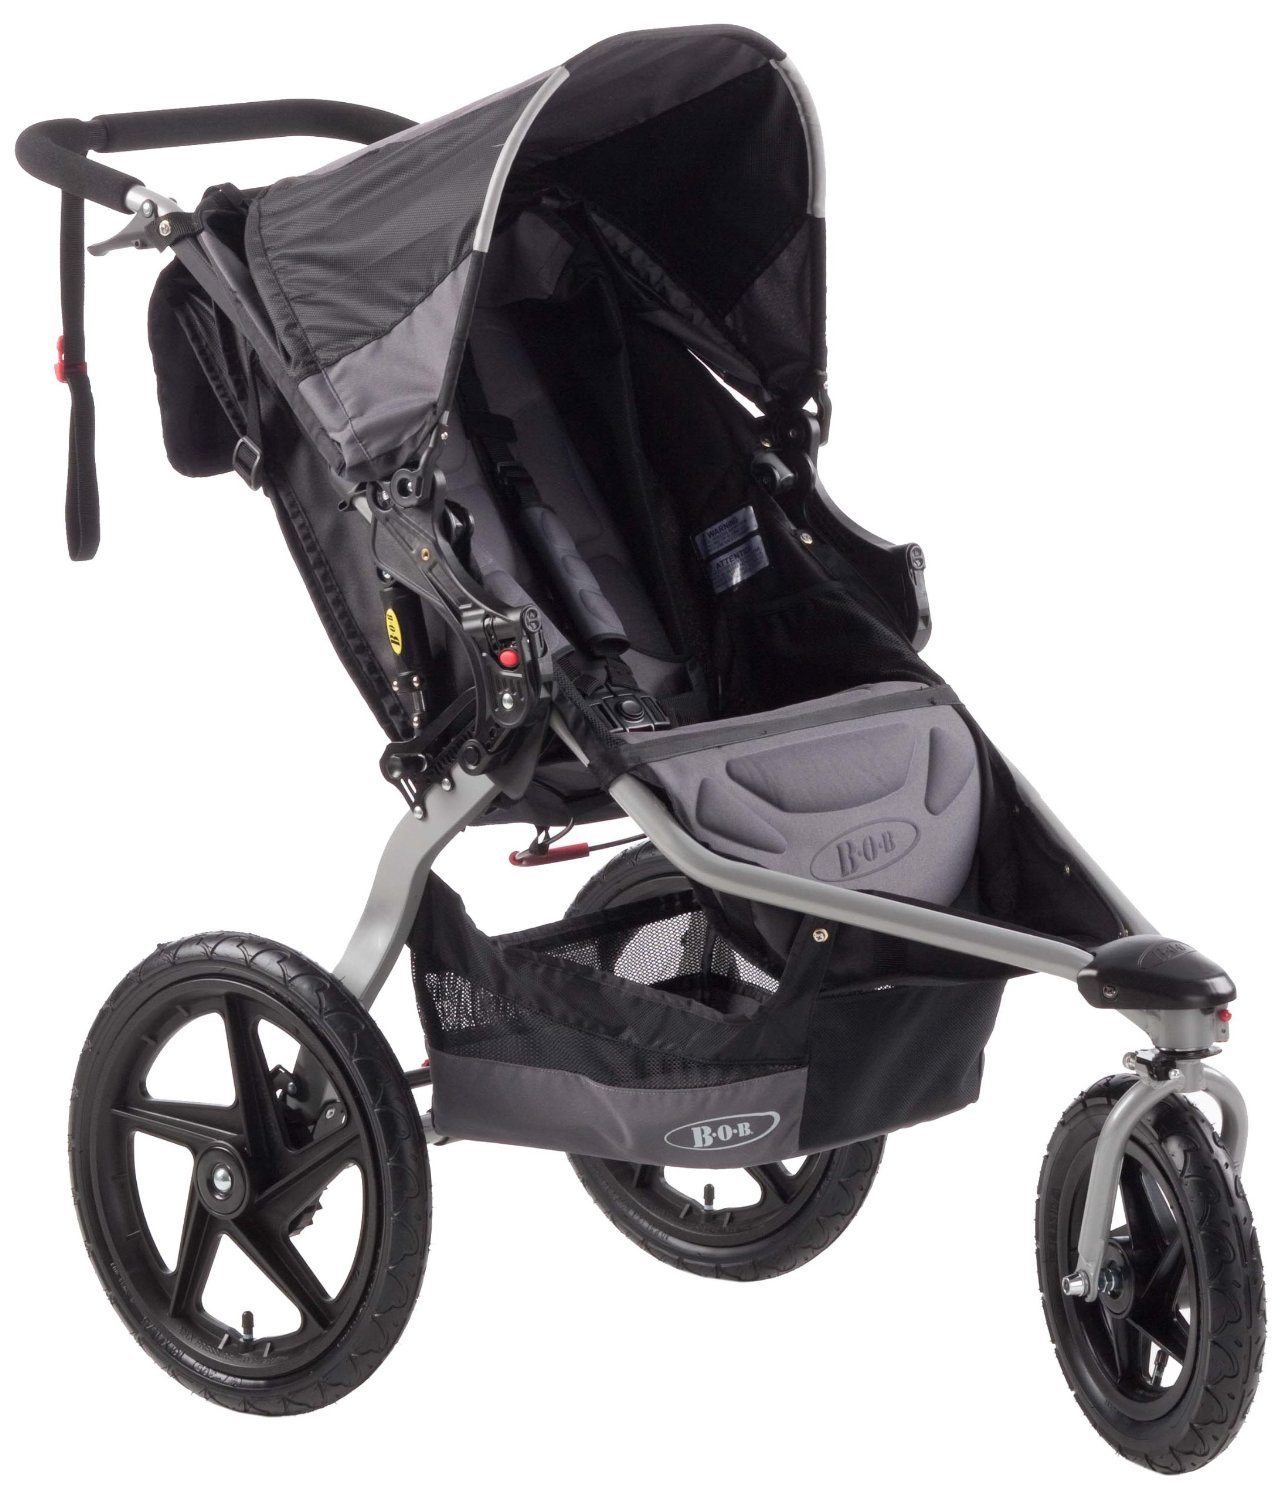 how much does a stroller cost